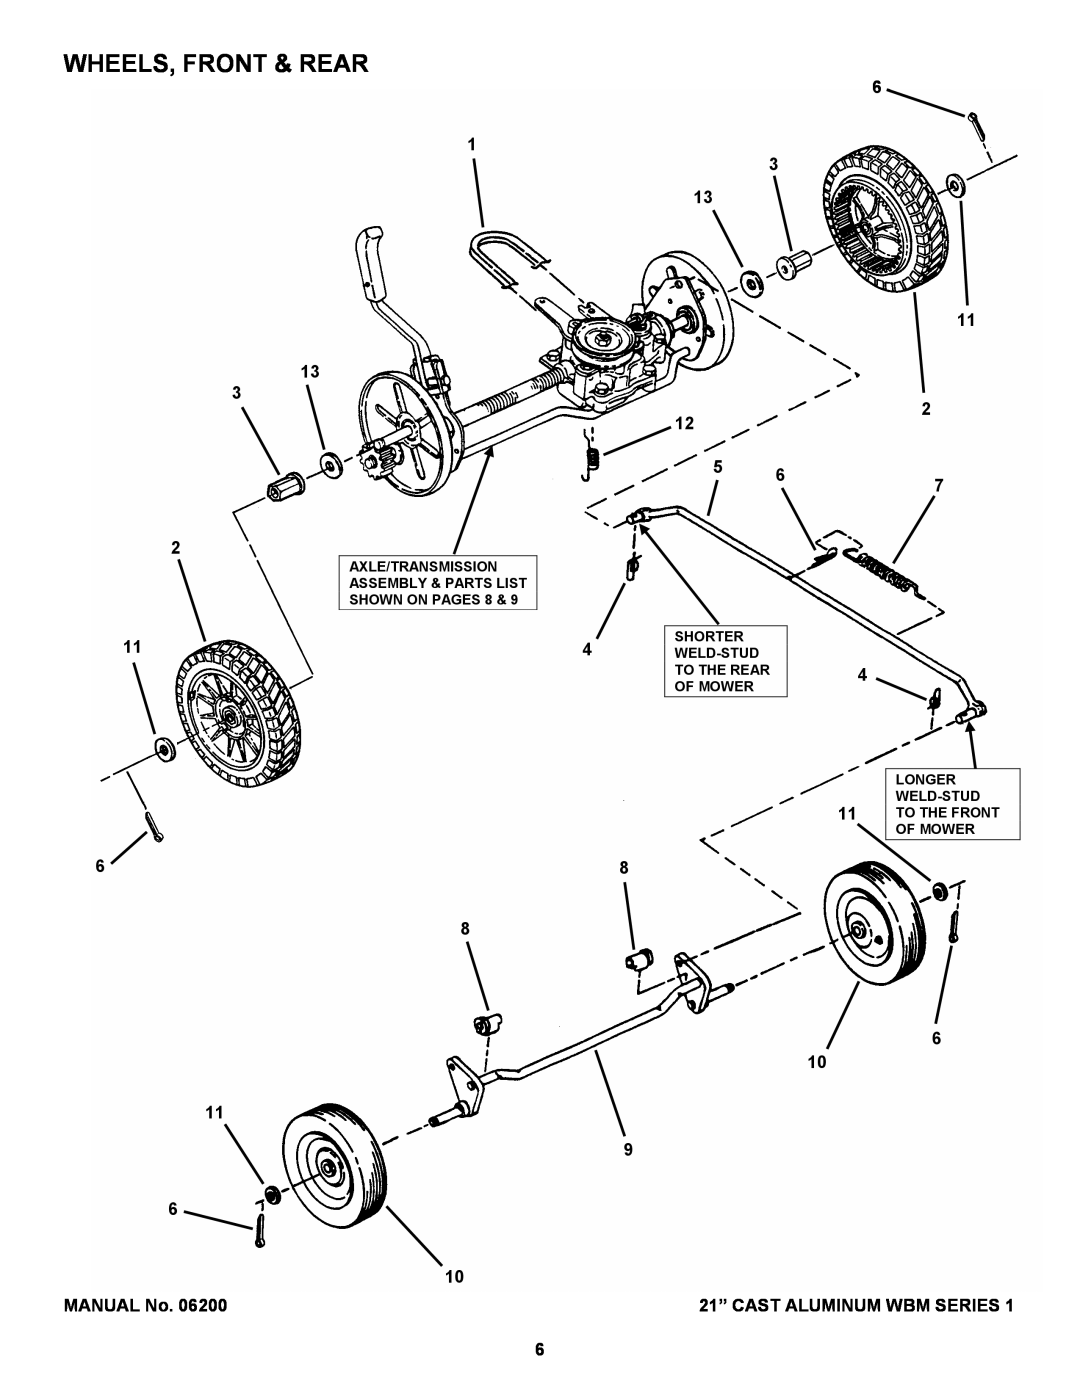 Snapper ECLP21551HV manual Wheels, Front & Rear, Axle/Transmission Assembly & Parts List Shown On Pages, Shorter, Weld-Stud 